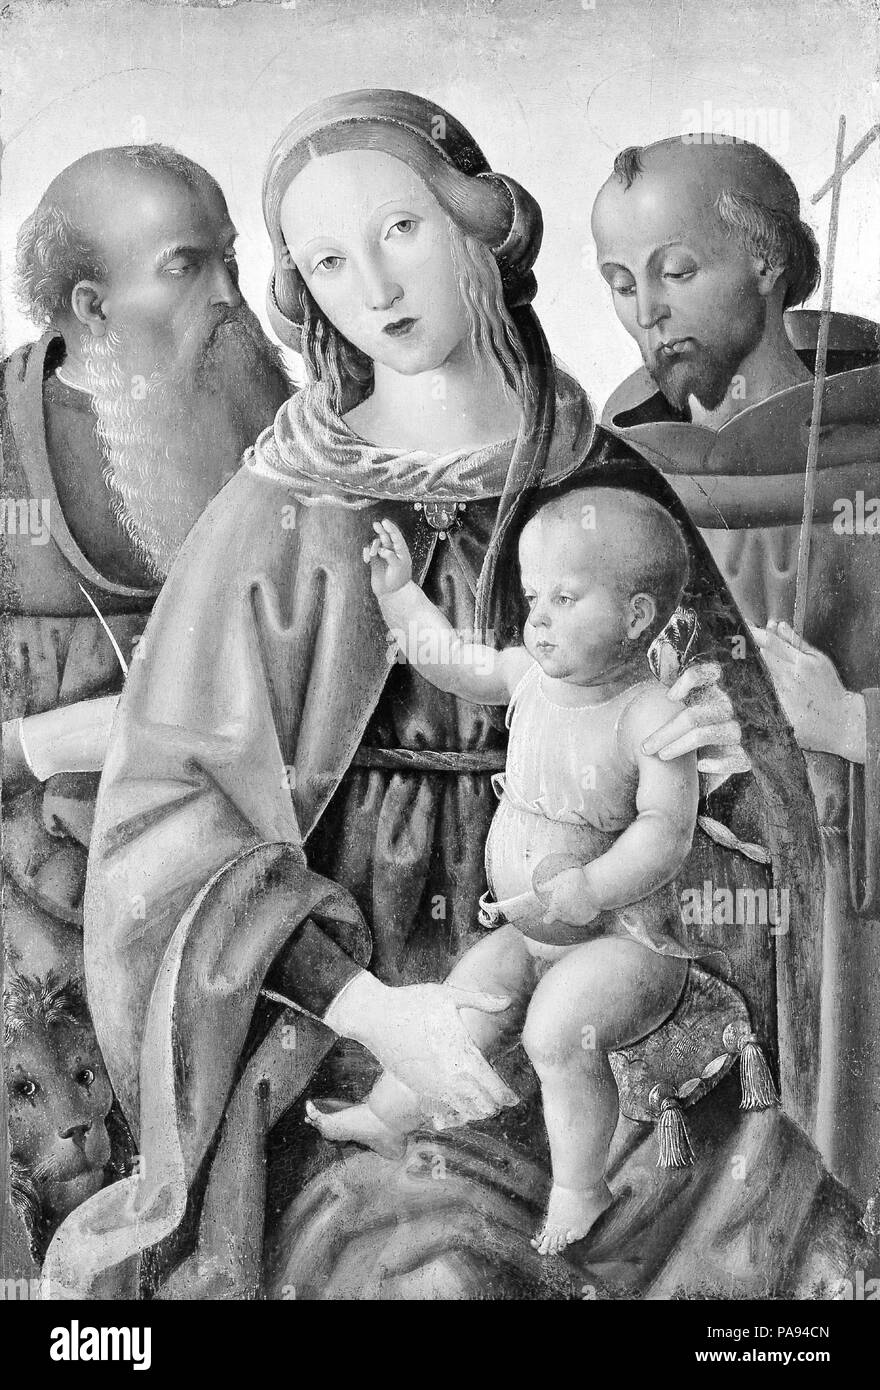 Madonna and Child with Saints Jerome and Francis. Artist: Italian (Umbrian) Painter (ca. 1500). Dimensions: Overall 24 5/8 x 16 3/4 in. (62.5 x 42.5 cm); painted surface 23 5/8 x 15 7/8 in. (60 x 40.3 cm). Museum: Metropolitan Museum of Art, New York, USA. Stock Photo